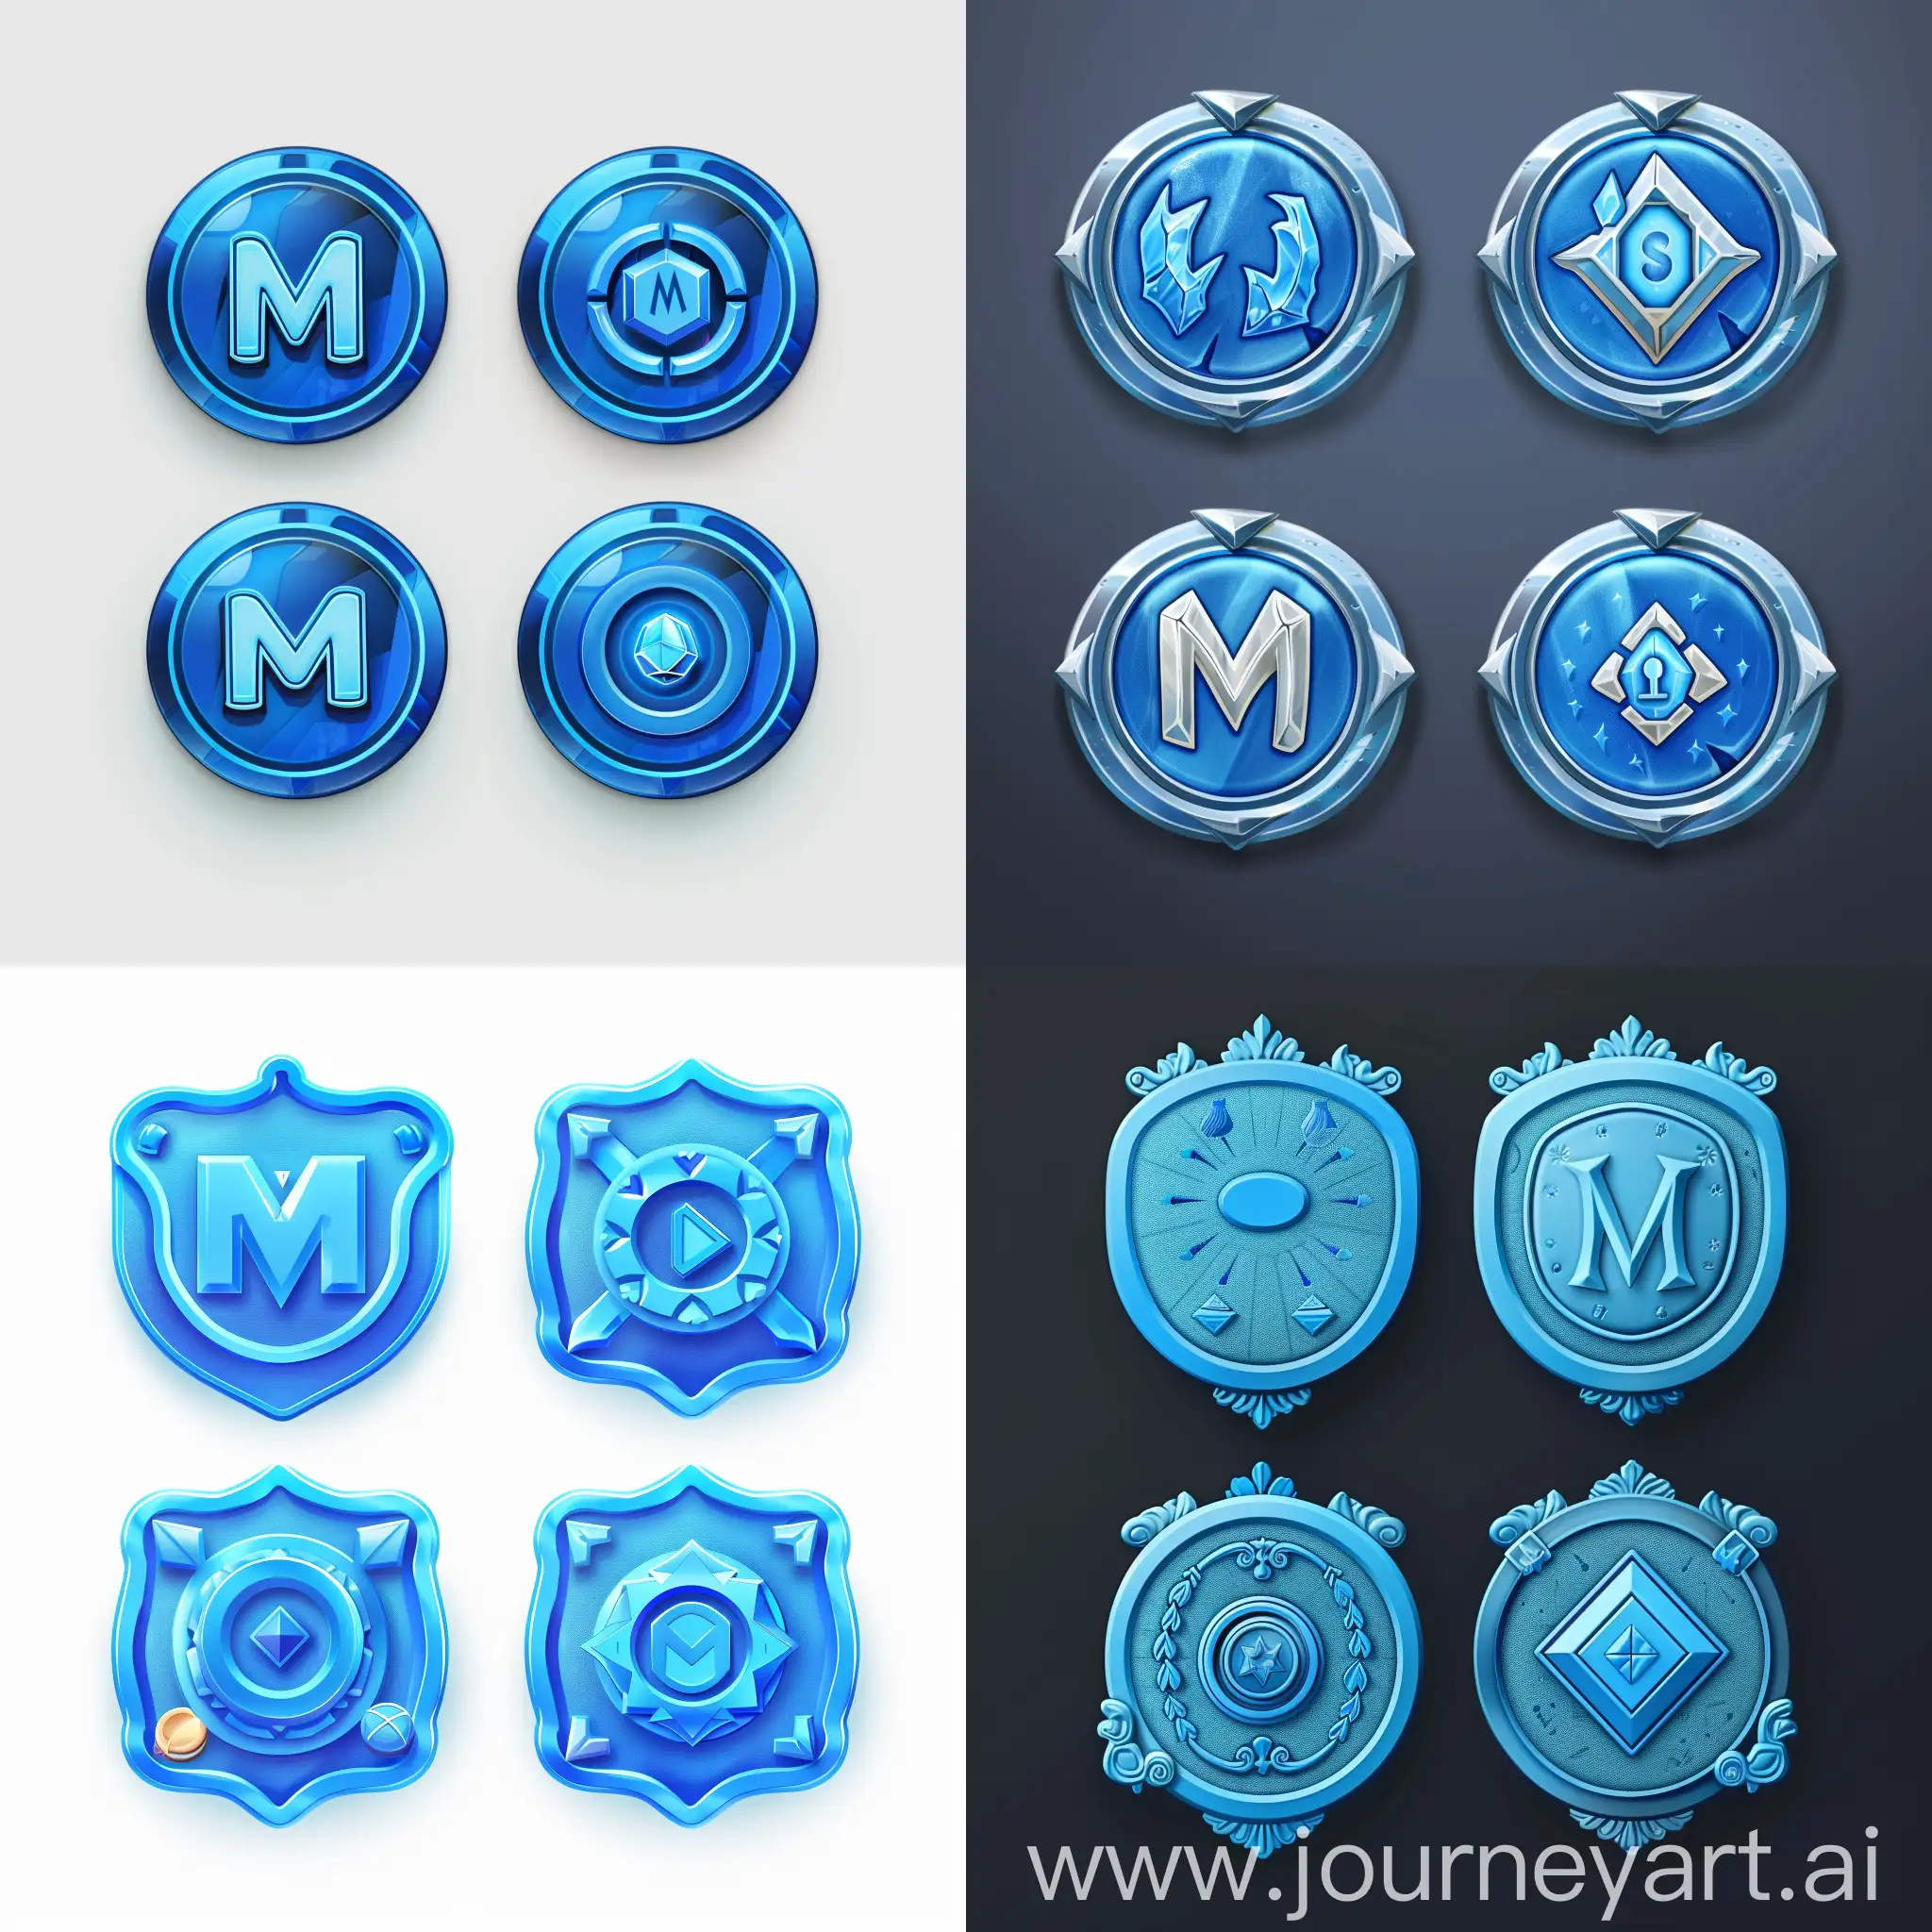 Four different badges should be designed, each with a blue color and a central letter "M". Each badge should serve a different function. The first badge should be empty, while the others should have increasing symbols